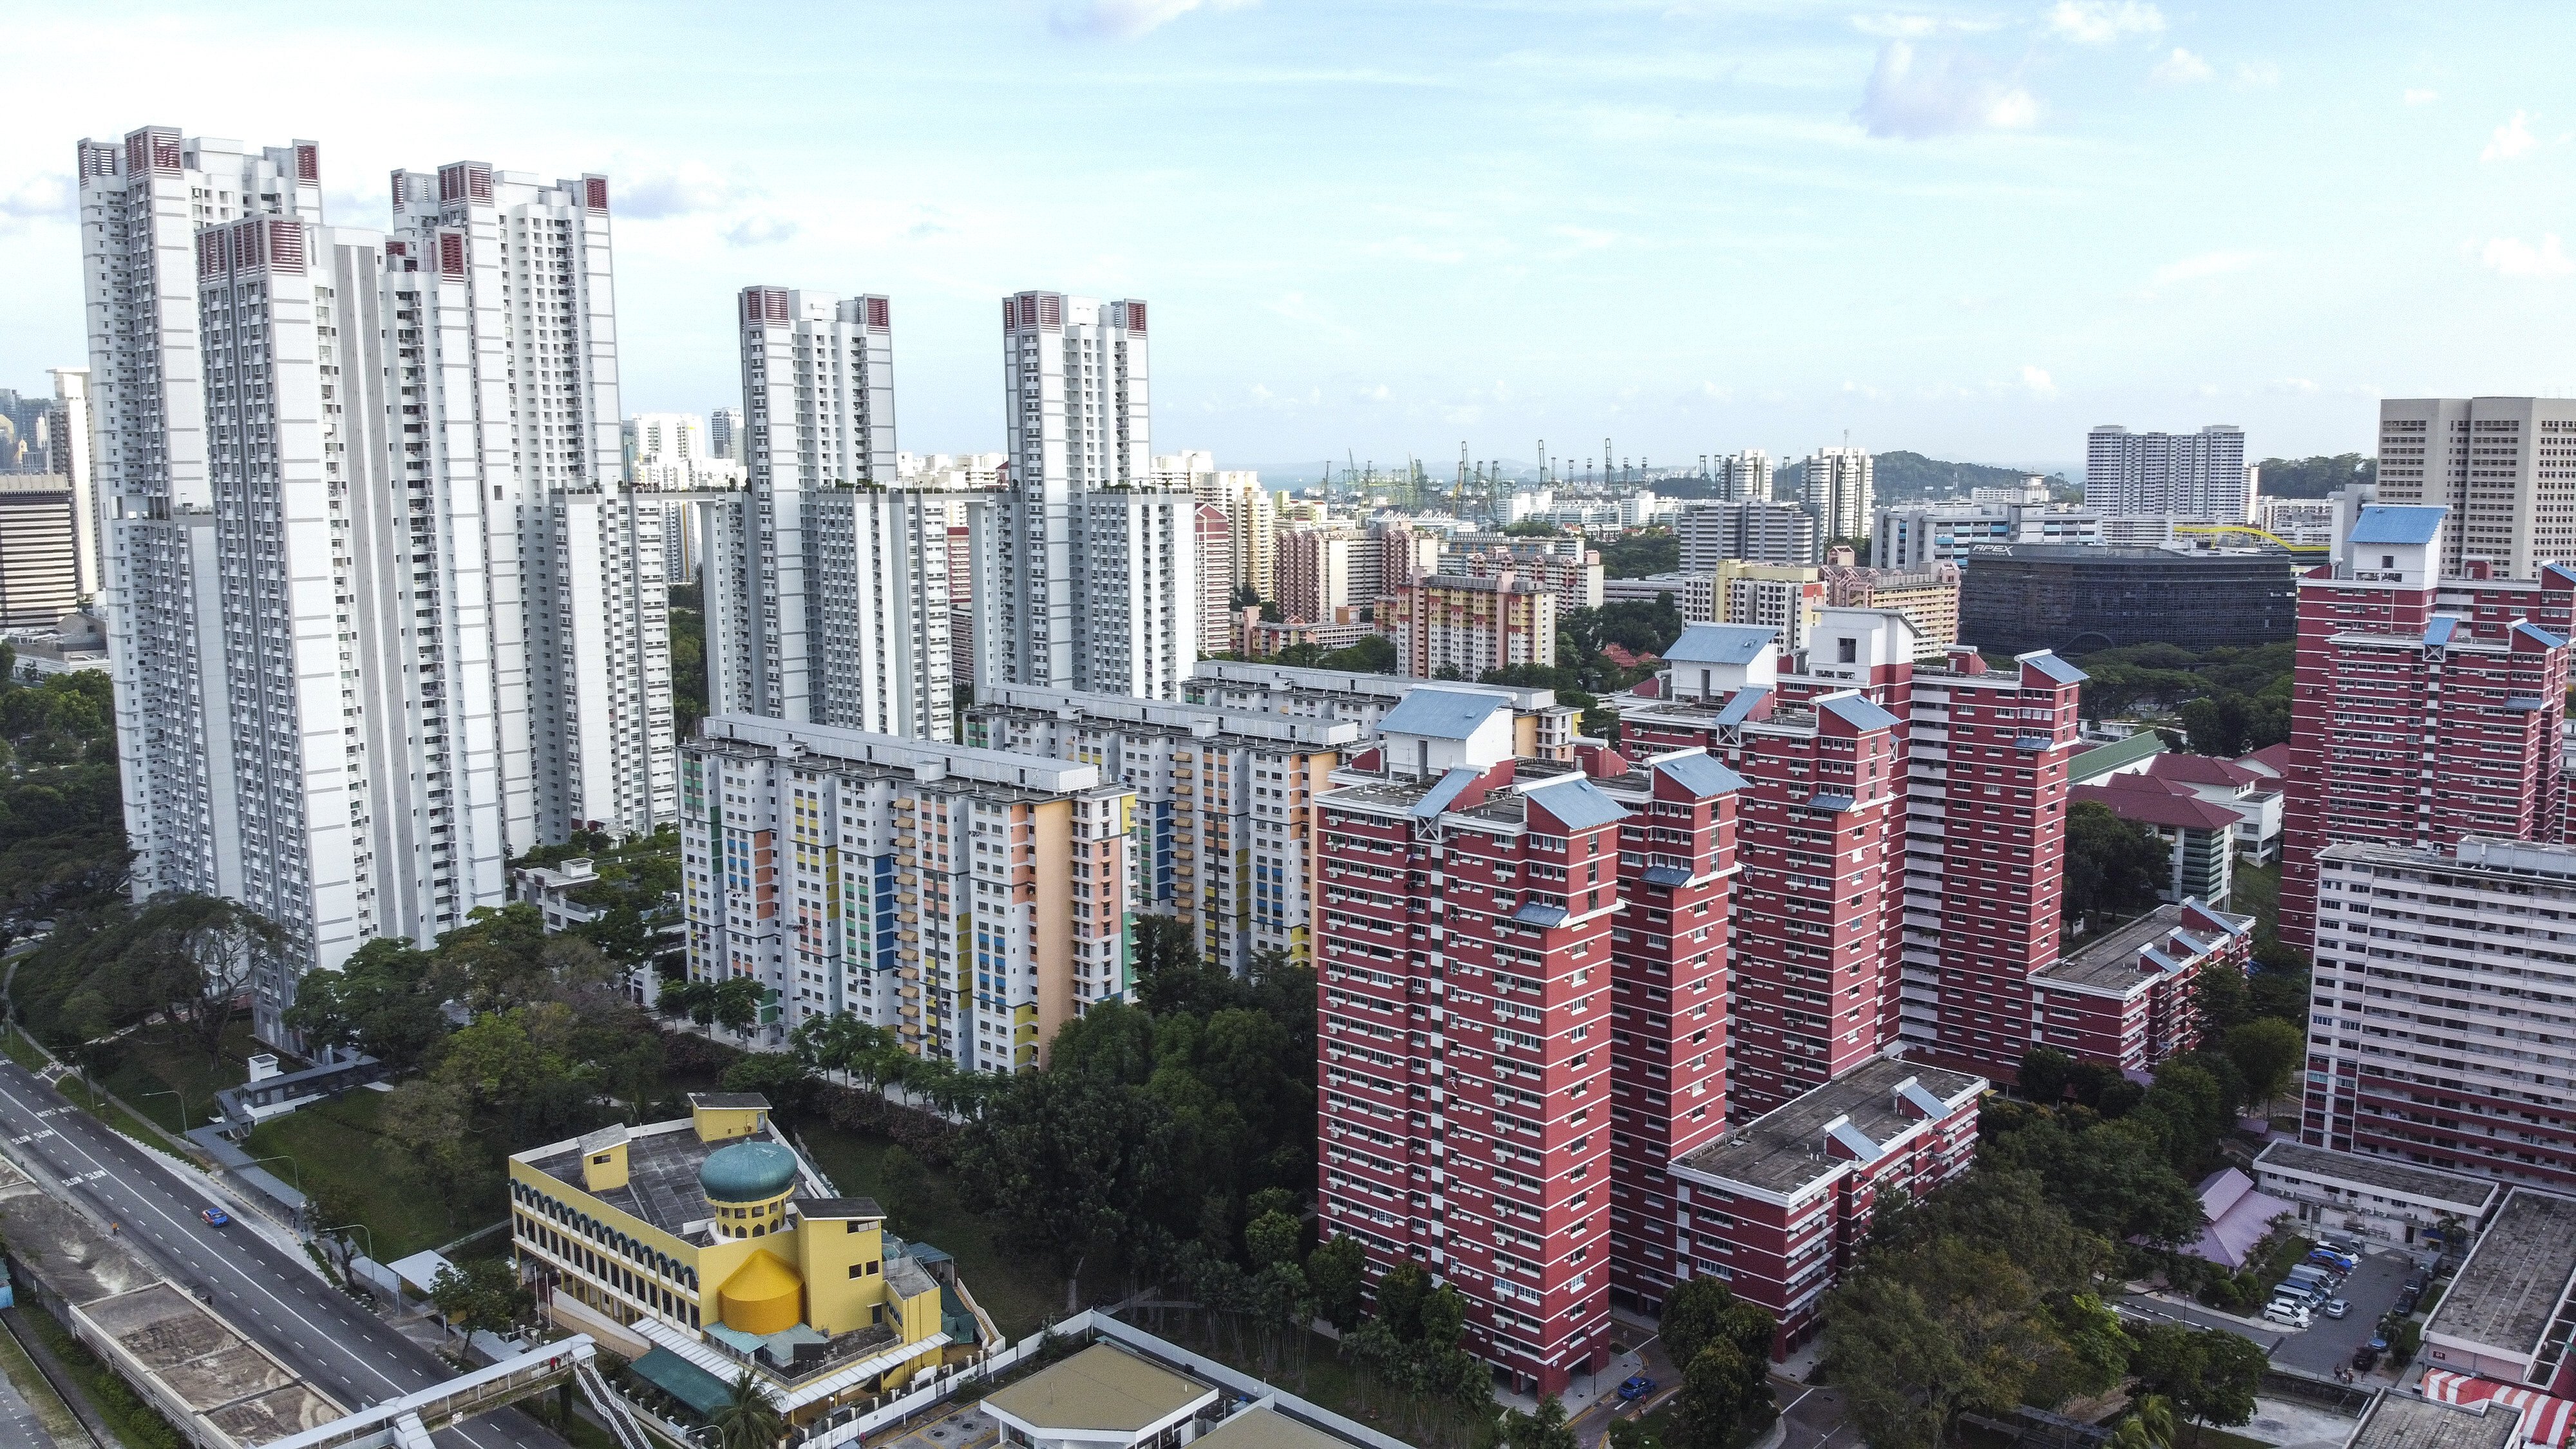 Public housings built by Singapore’s Housing and Development Board. Photo: Roy Issa